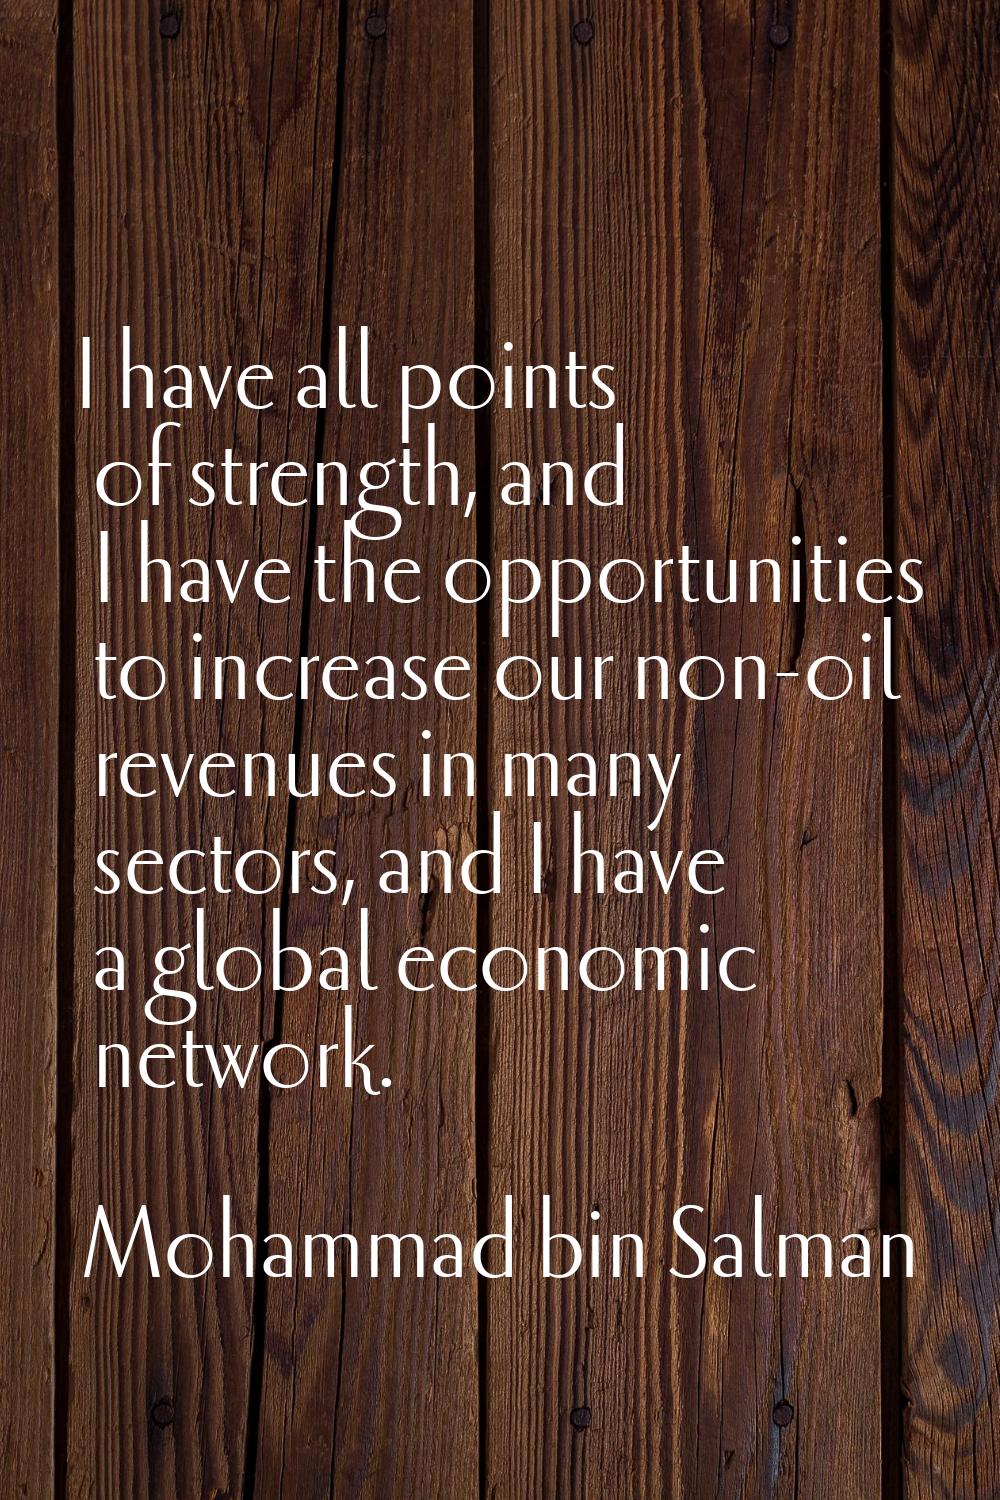 I have all points of strength, and I have the opportunities to increase our non-oil revenues in man